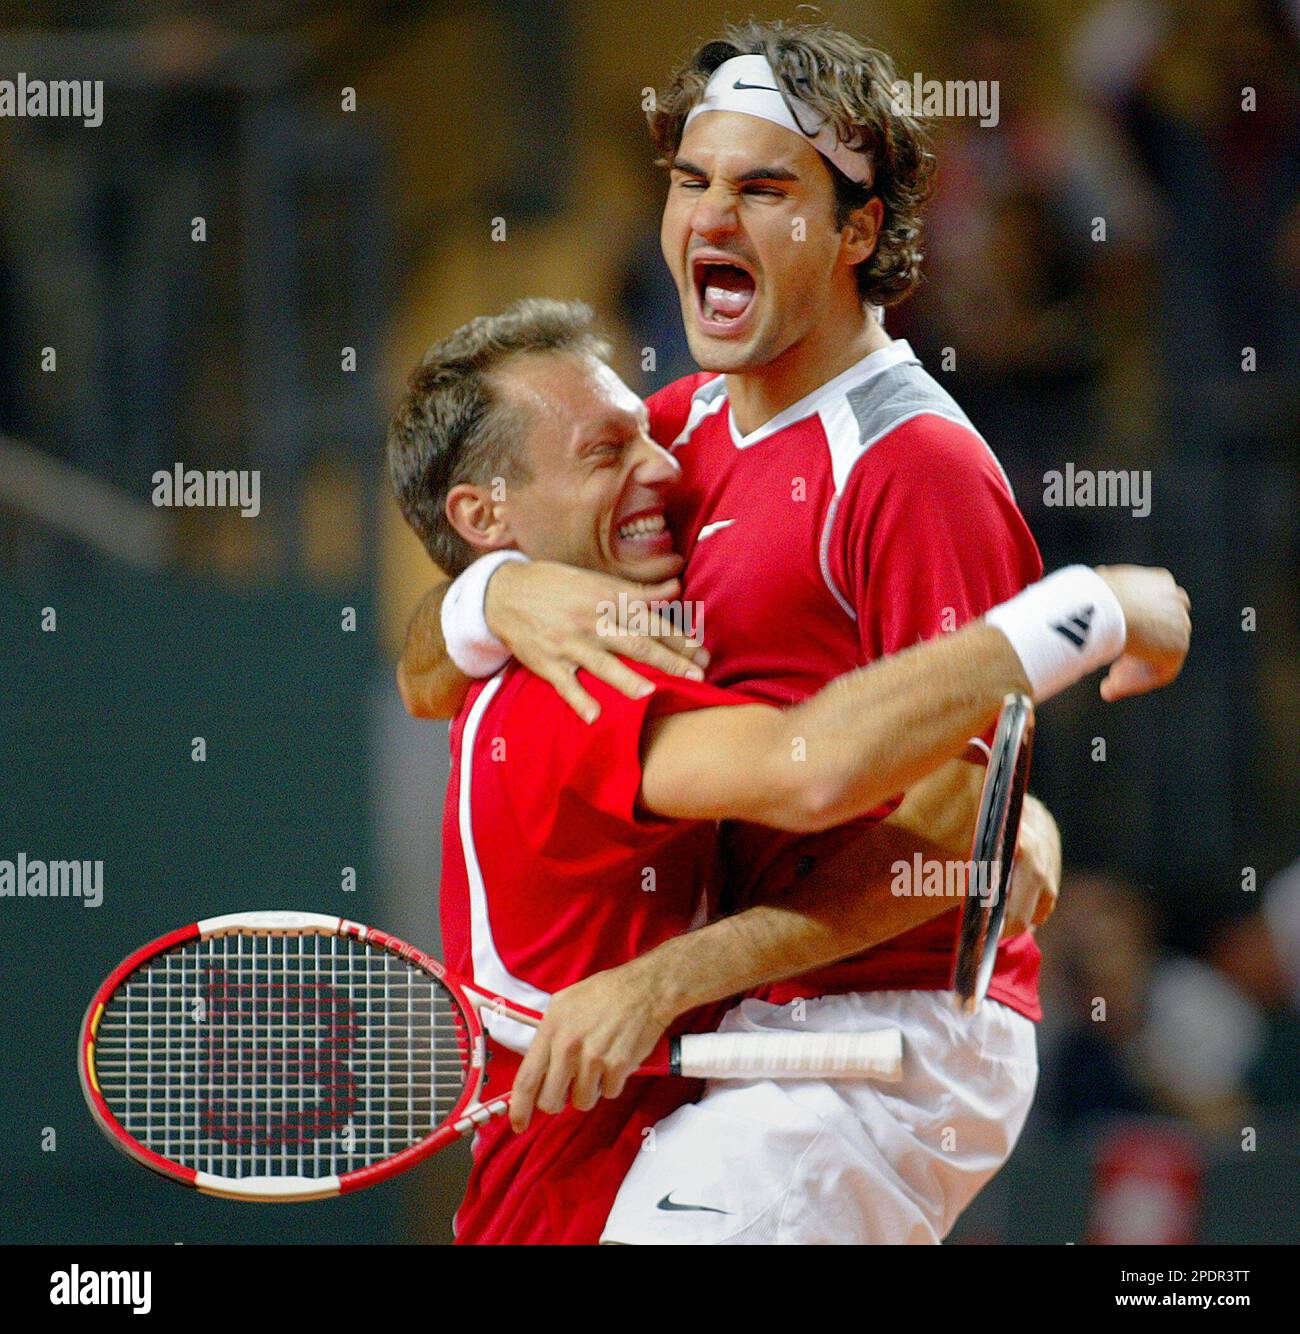 Tennis player Roger Federer of Switzerland, right, and teammate Yves  Allegro celebrate during their Davis Cup World Group Play-off double  against Great Britain in Geneva, Switzerland, on Saturday, Sept. 24, 2005.  (AP